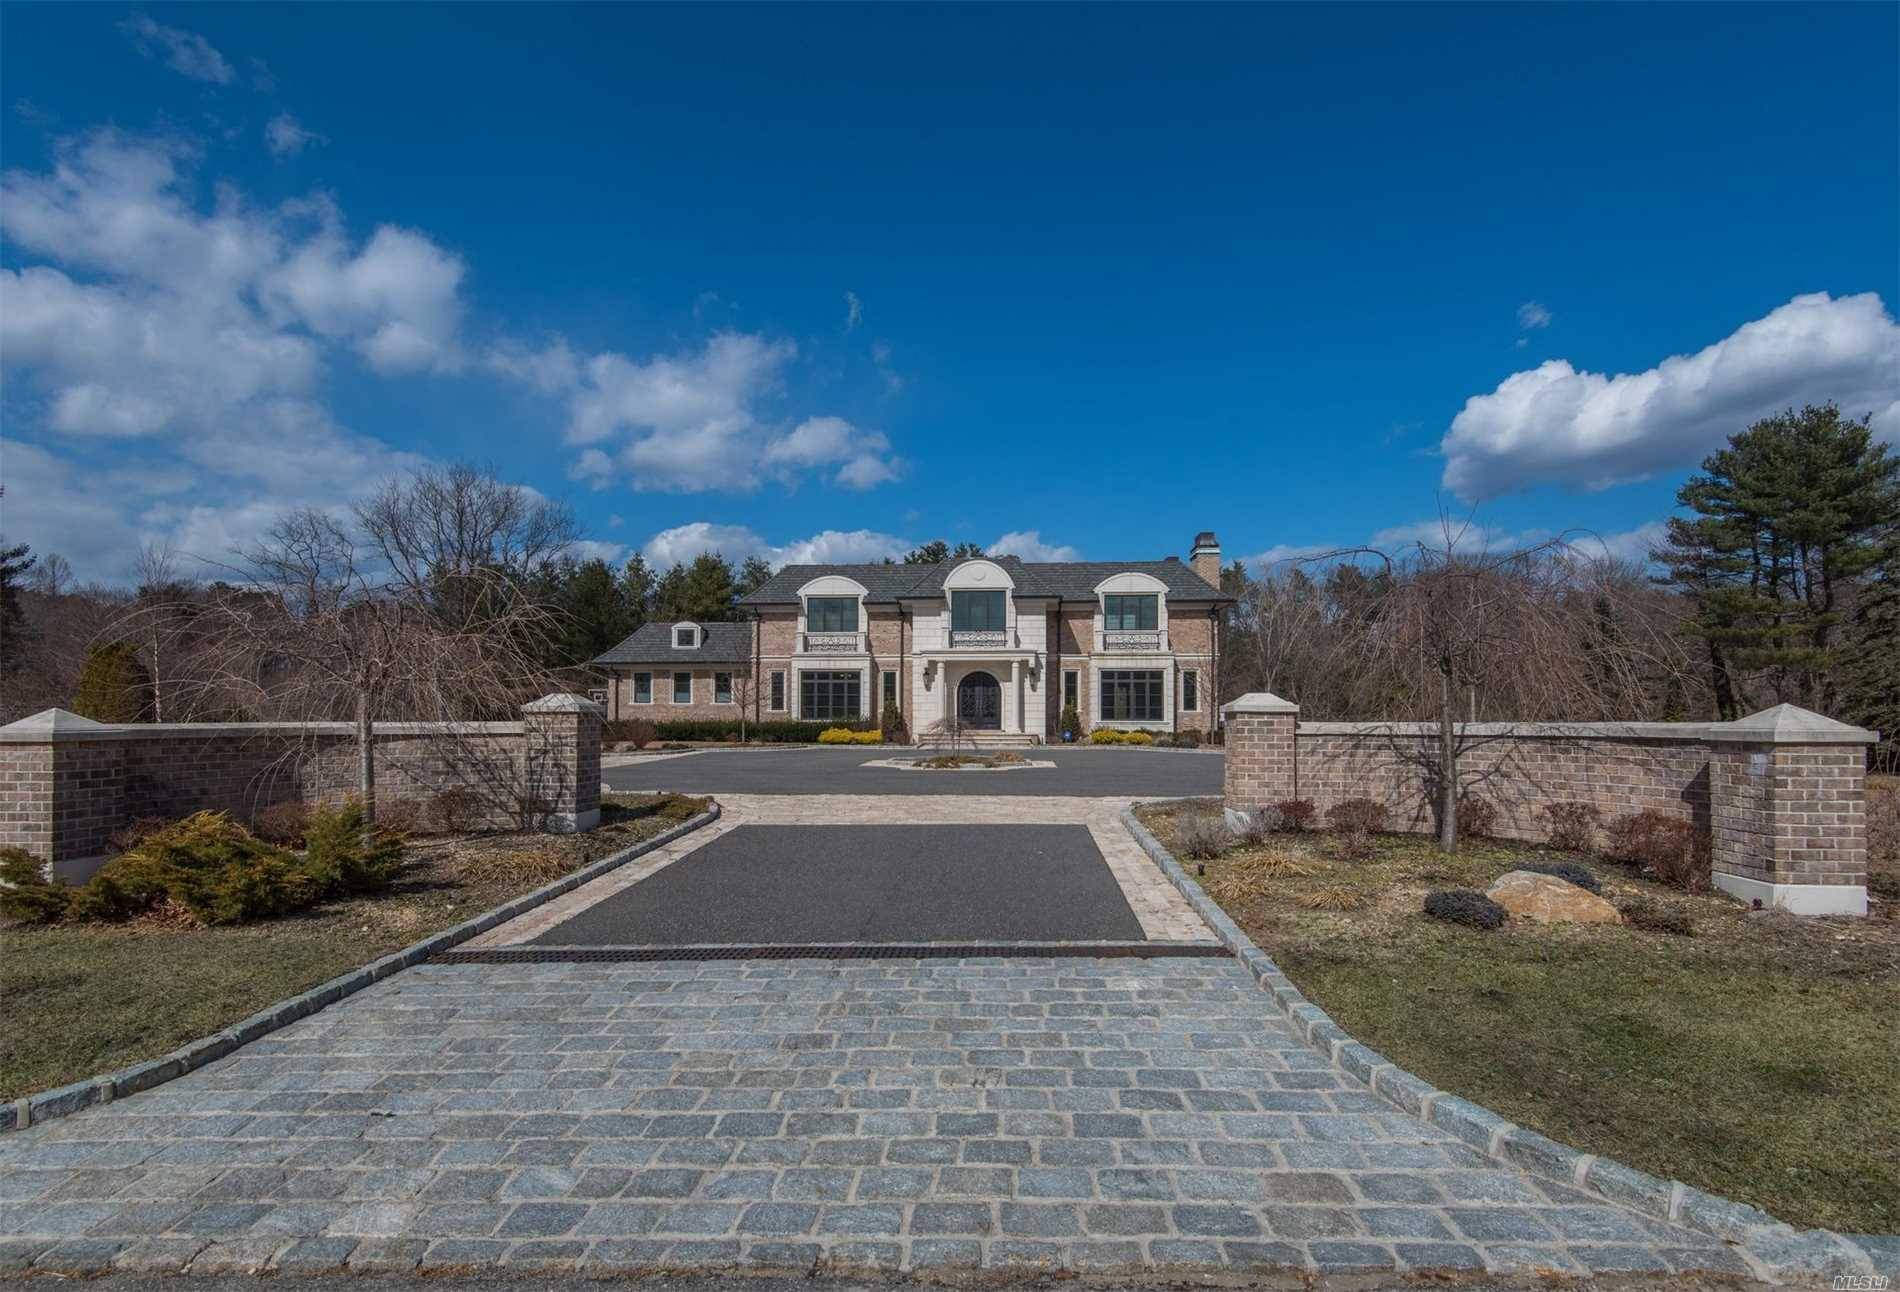 Welcome To Your Own Stone Manor Residence Perfectly Situated On 2 Landscaped Acres In The Prestigious Village Of Old Westbury.